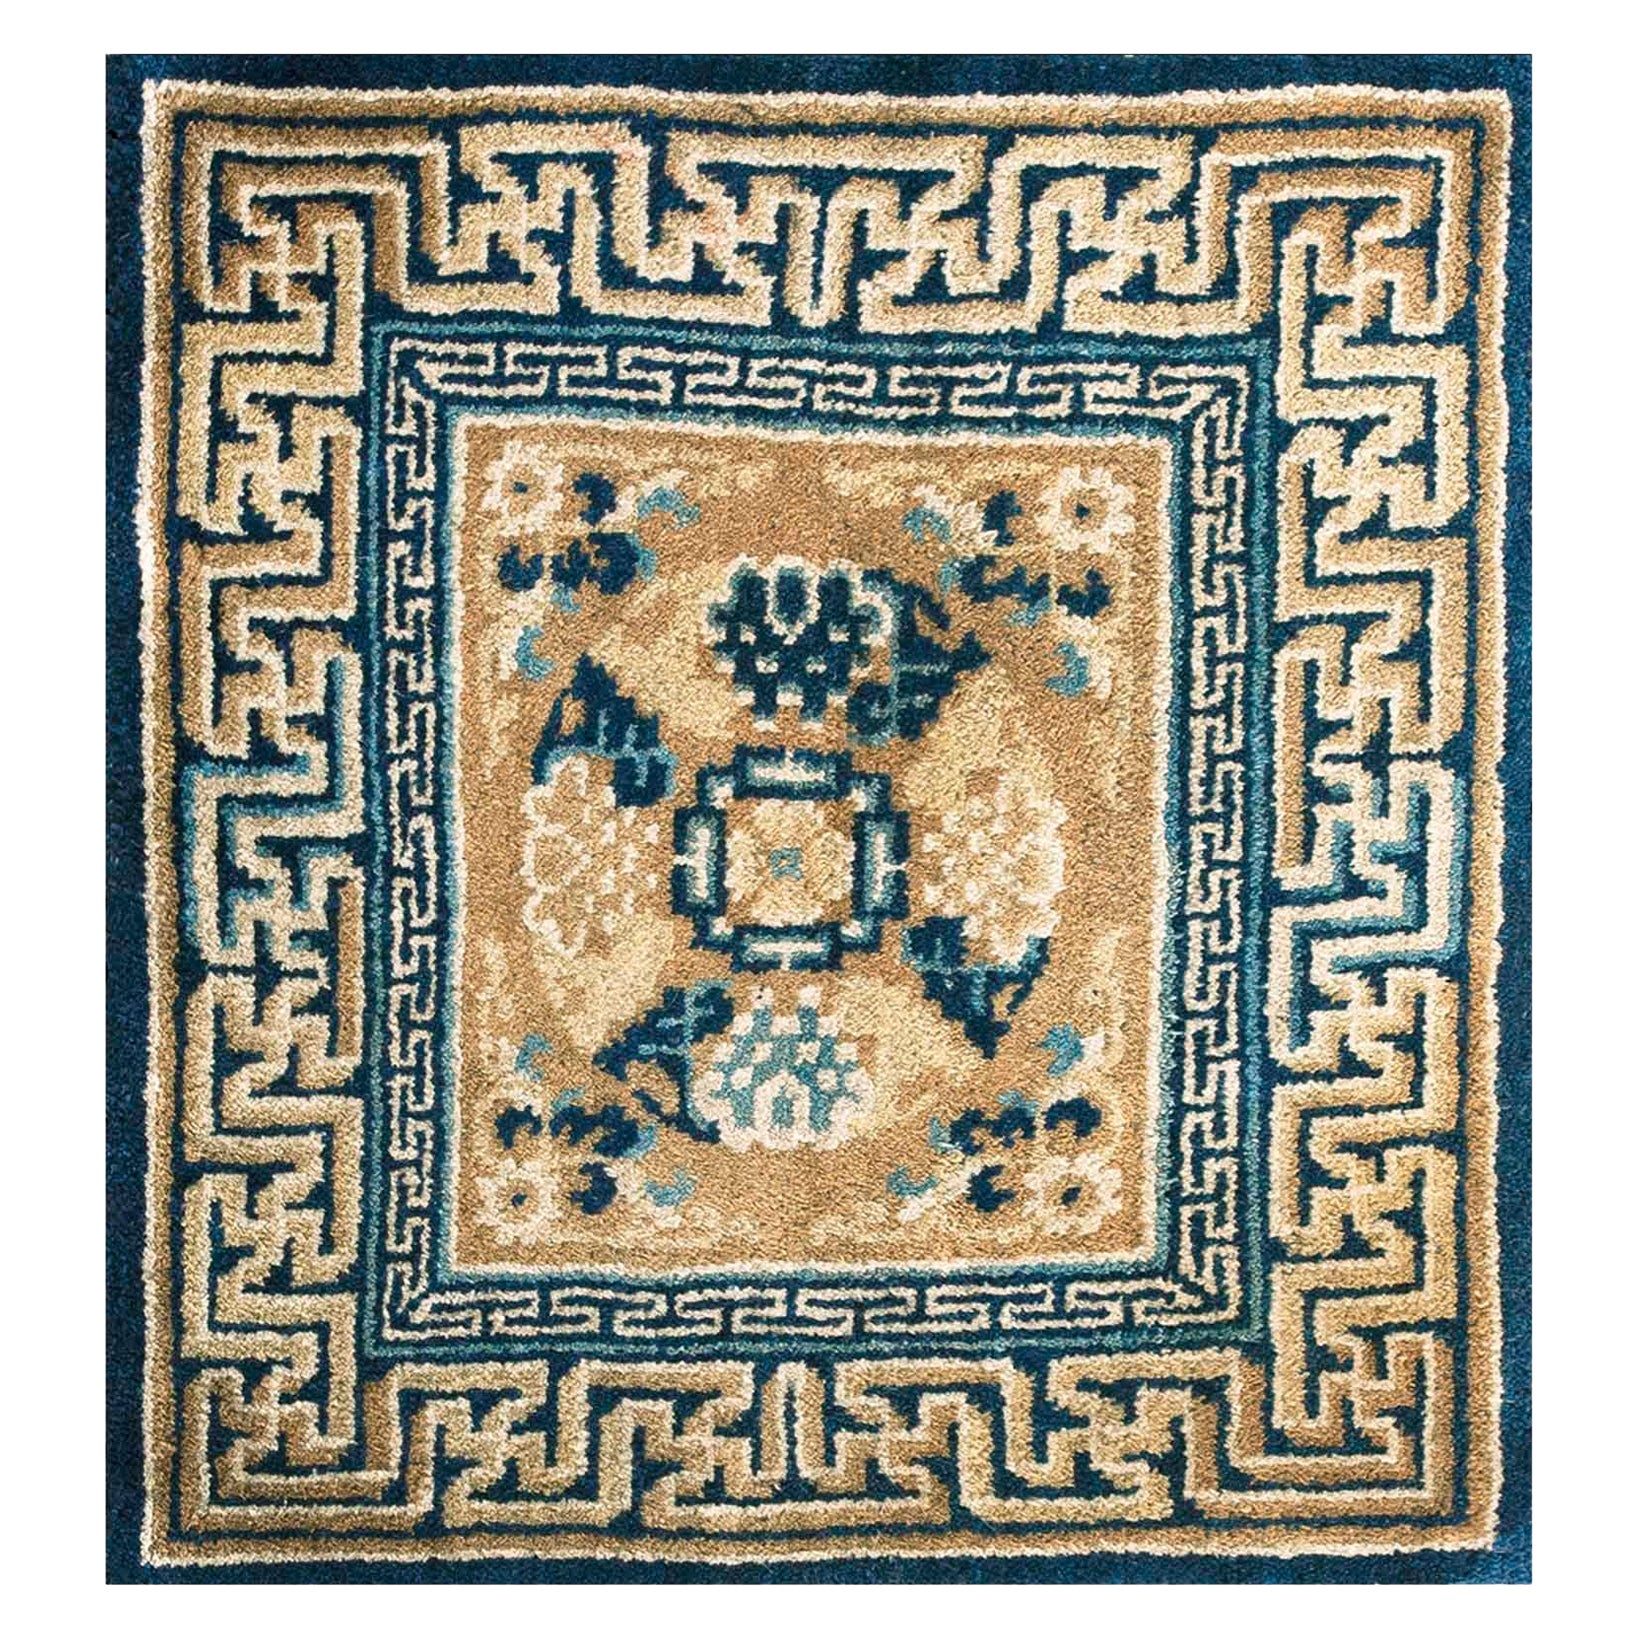 19th Century Chinese Ningxia Mat ( 2' x 2'2" - 60 x 65 ) For Sale